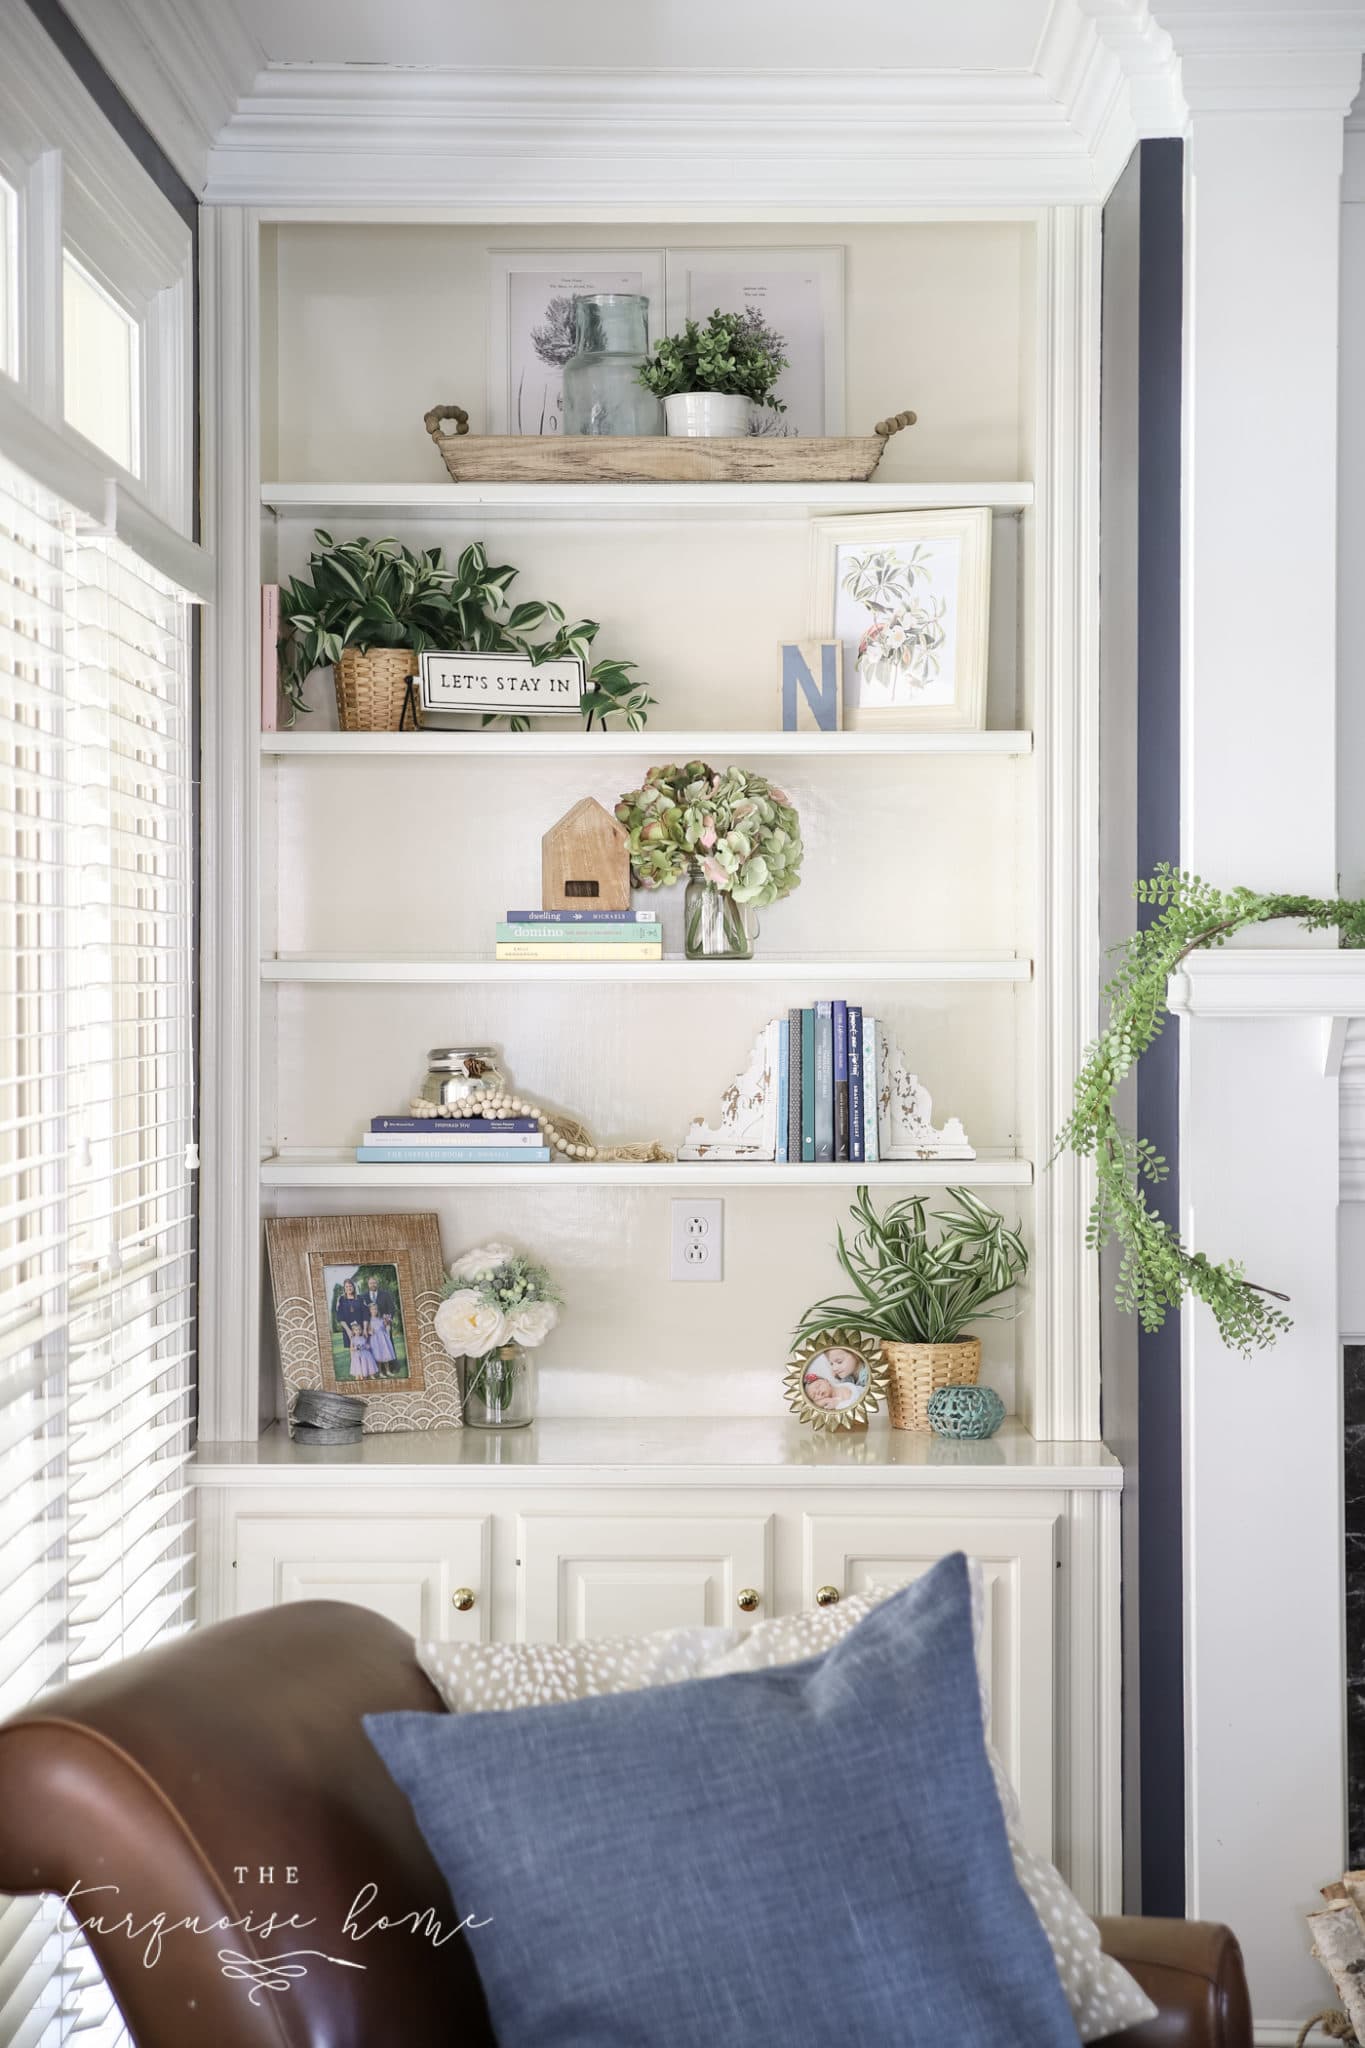 styling bookshelves with different ways of displaying books and trinkets together